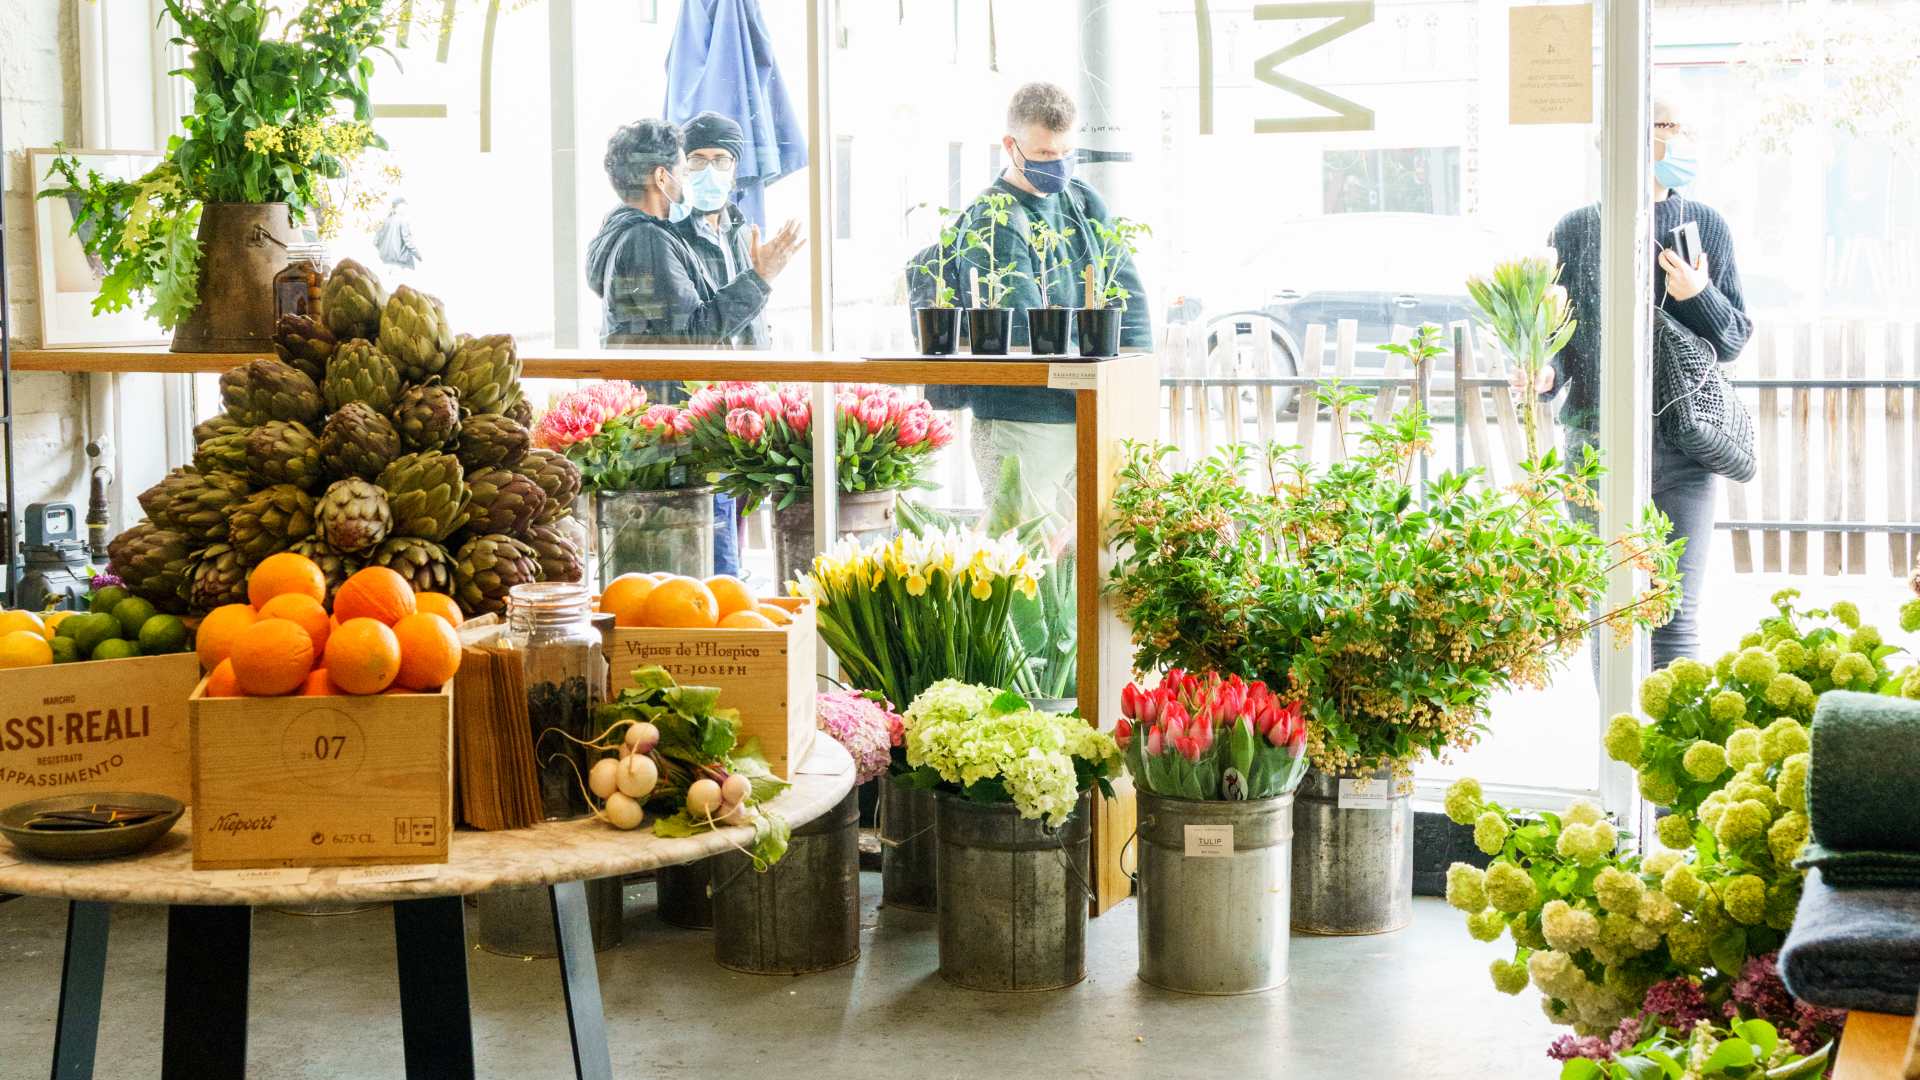 Morning Market Is Andrew McConnell's New Euro-Style Grocer on Gertrude Street